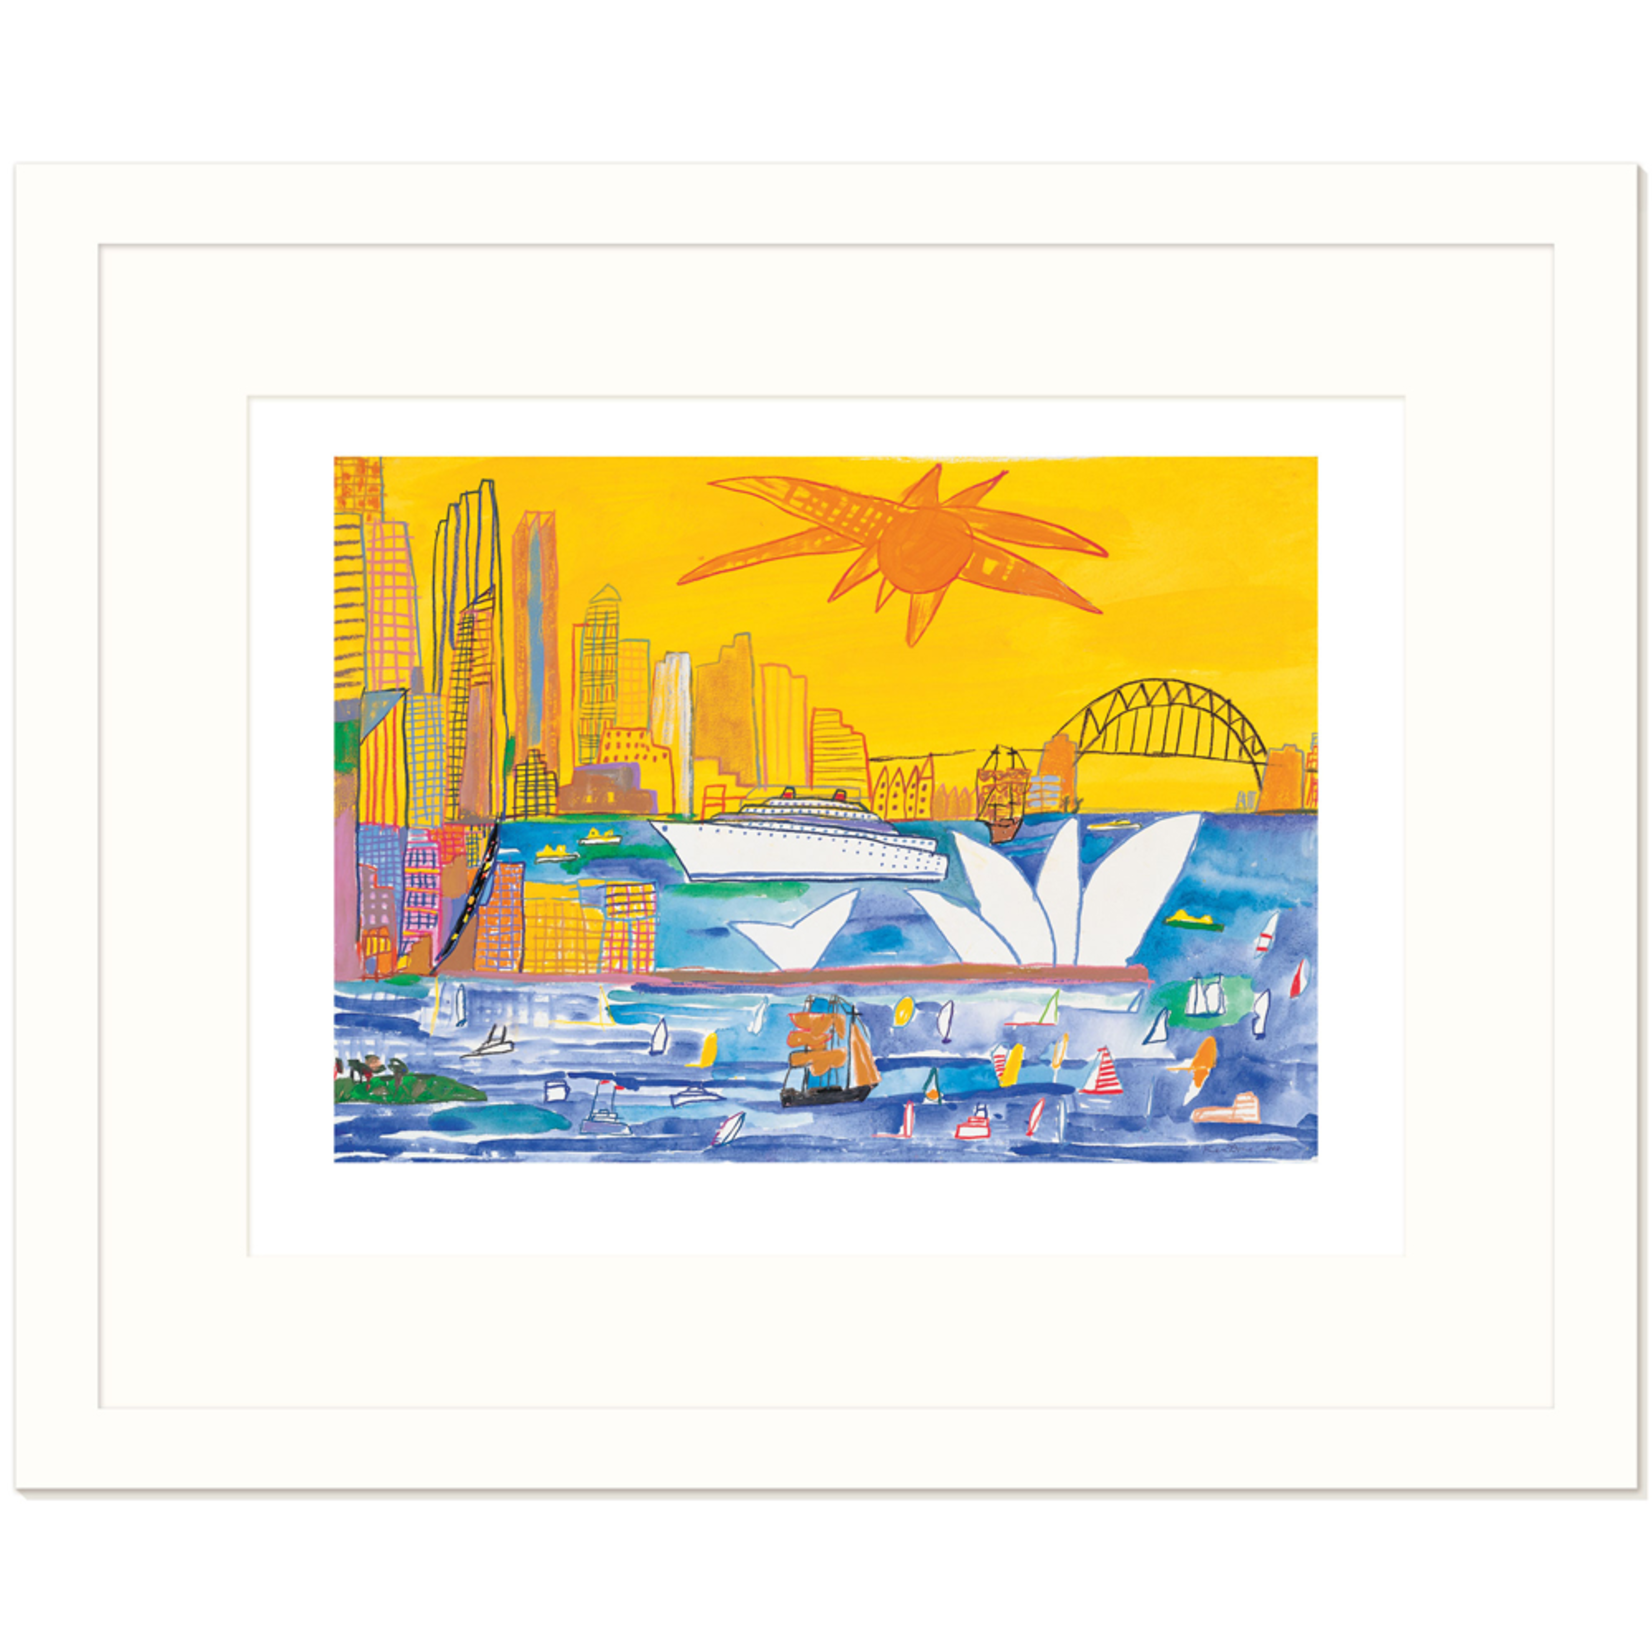 Limited Edition Prints Sydney by day, 2000